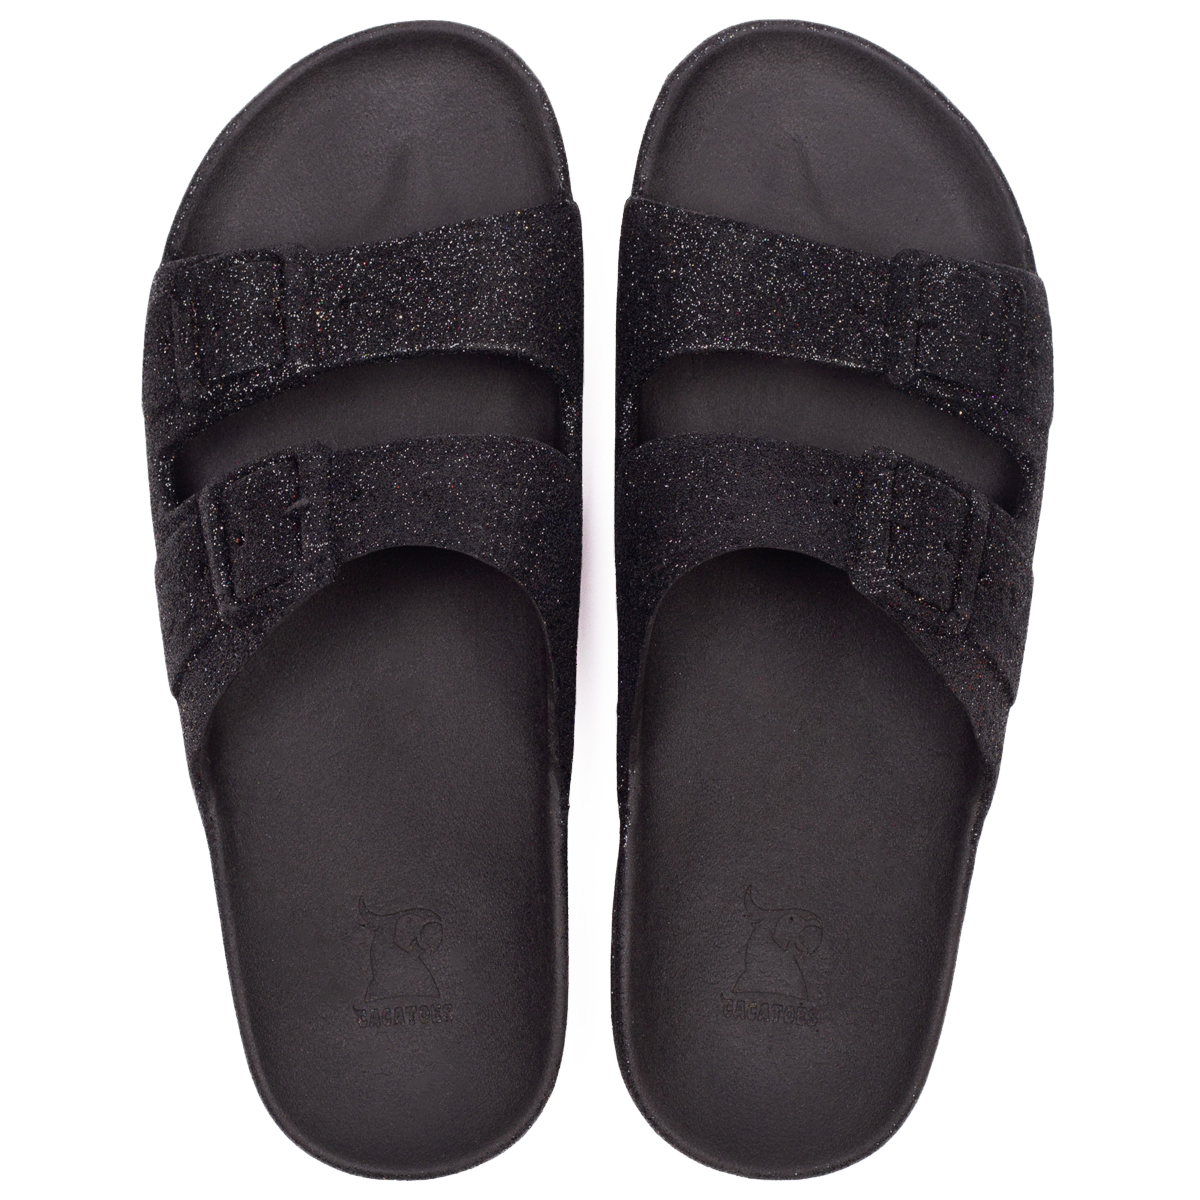 CACATOES TRANCOSO SLIPPERS